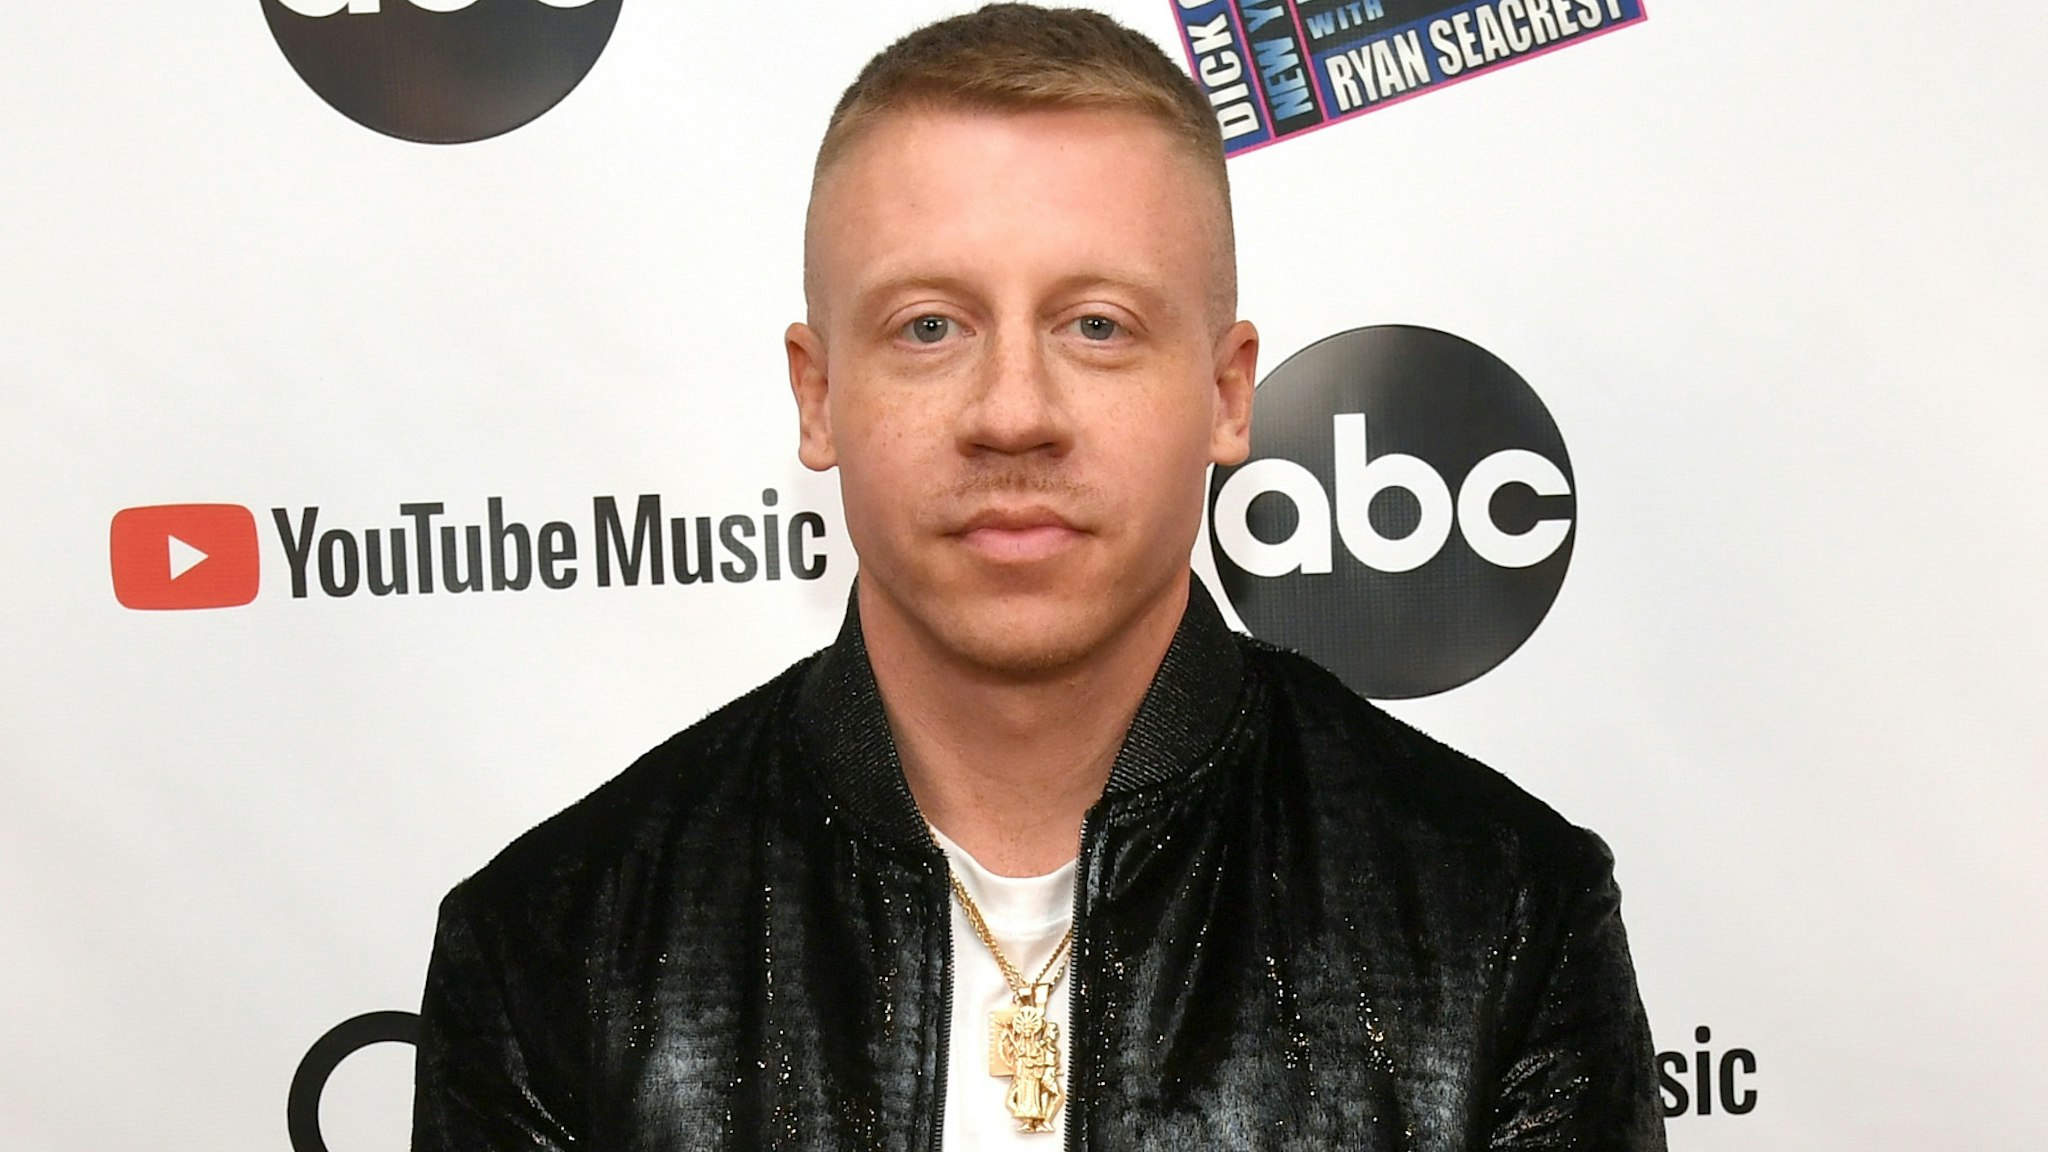 Macklemore attends Dick Clark's New Year's Rockin' Eve With Ryan Seacrest 2019 on December 31, 2018 in Los Angeles, California.